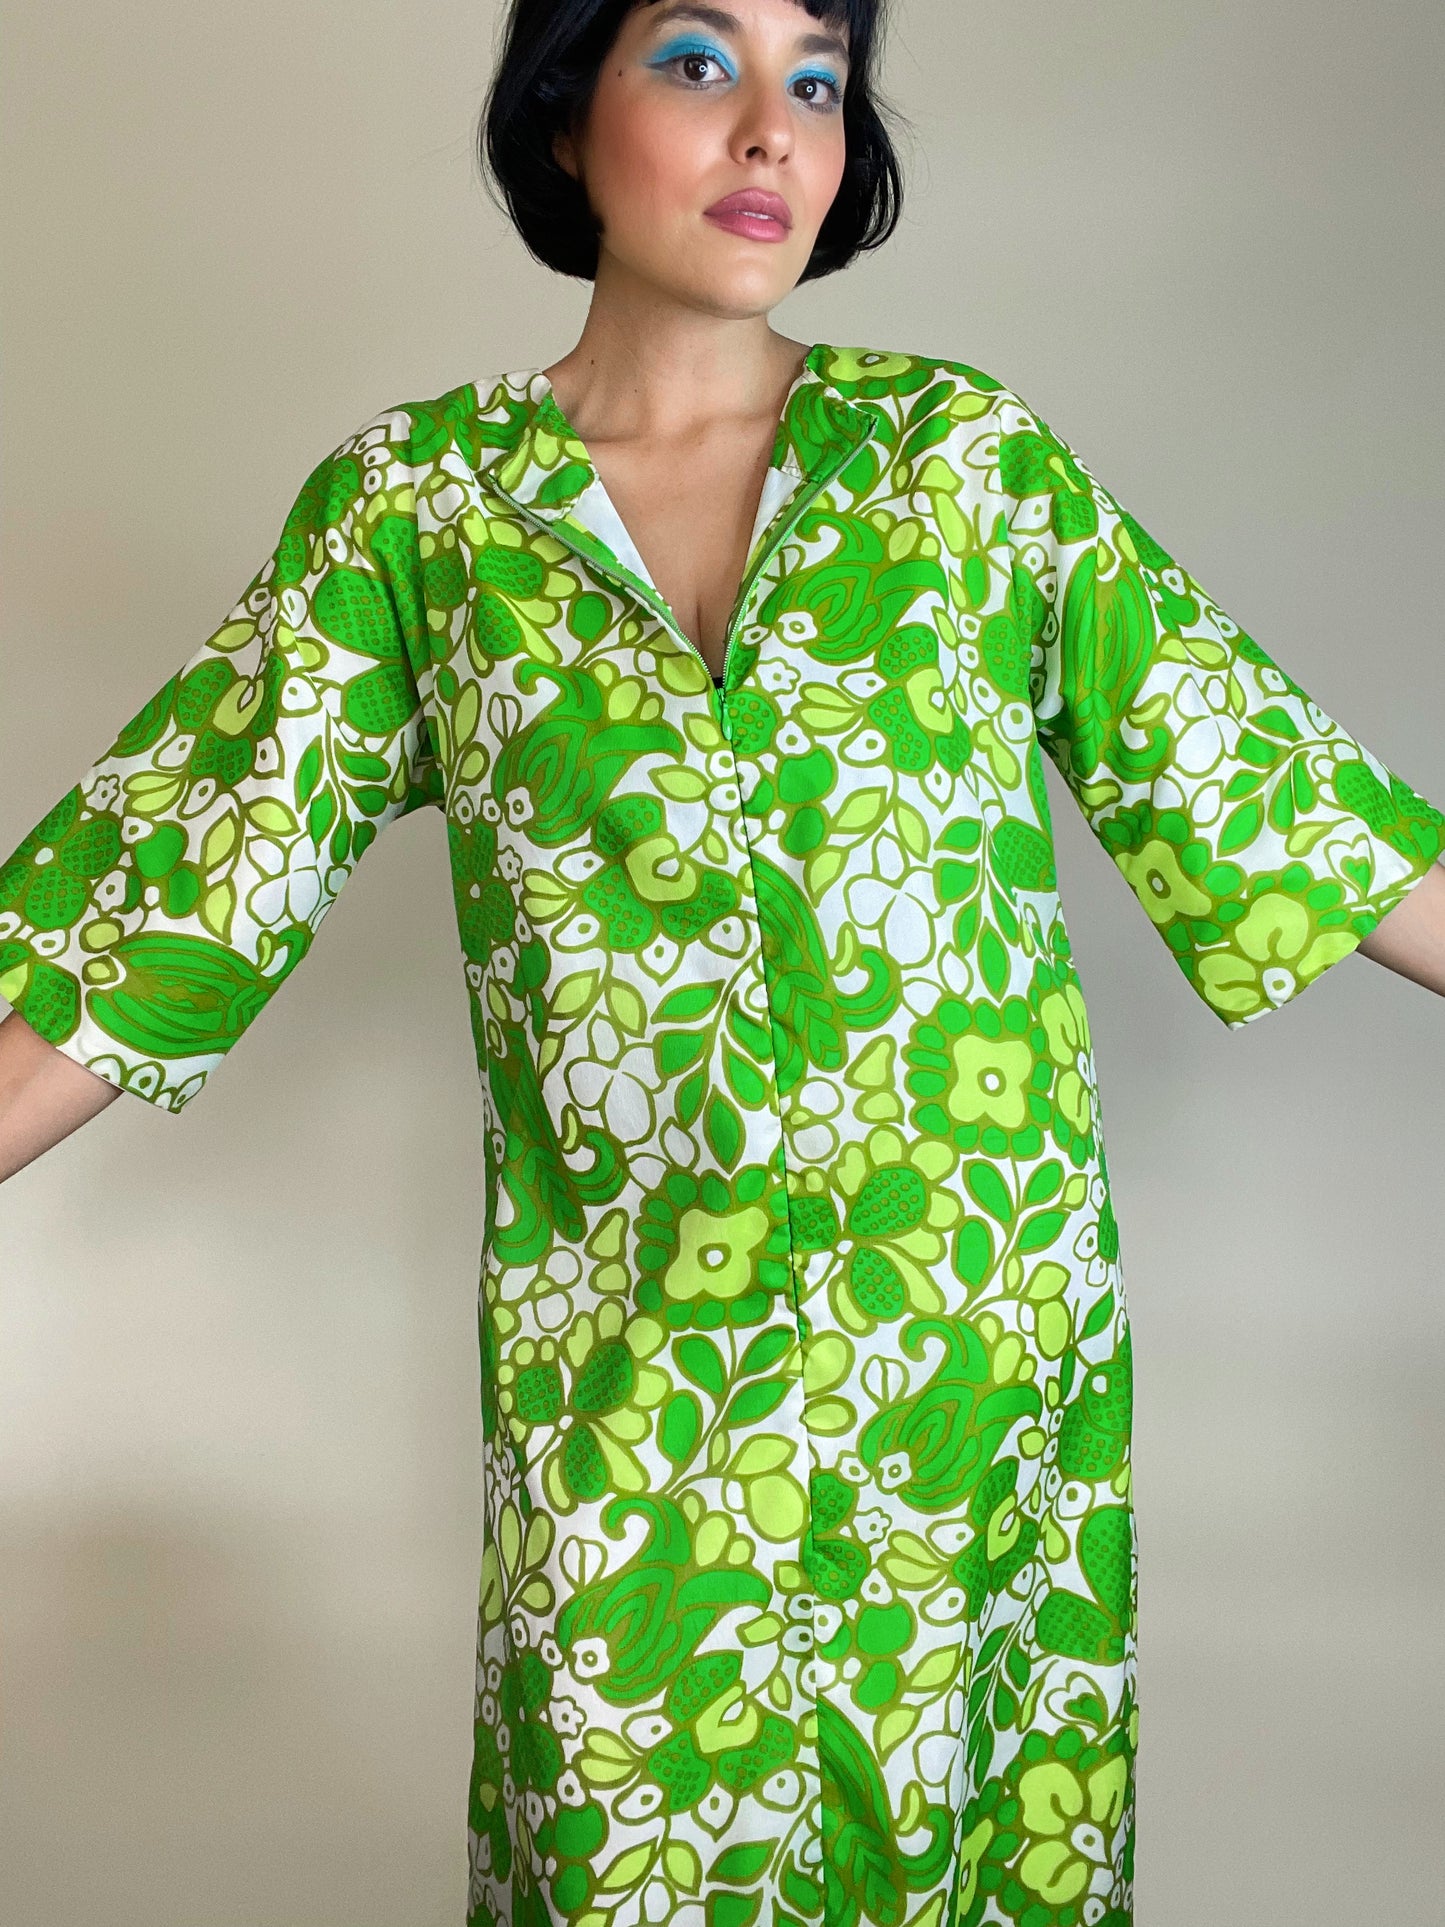 Vintage 60s Neon Green Floral Print Zip Up Front and Back Slit Dress Fits Sizes XS-M